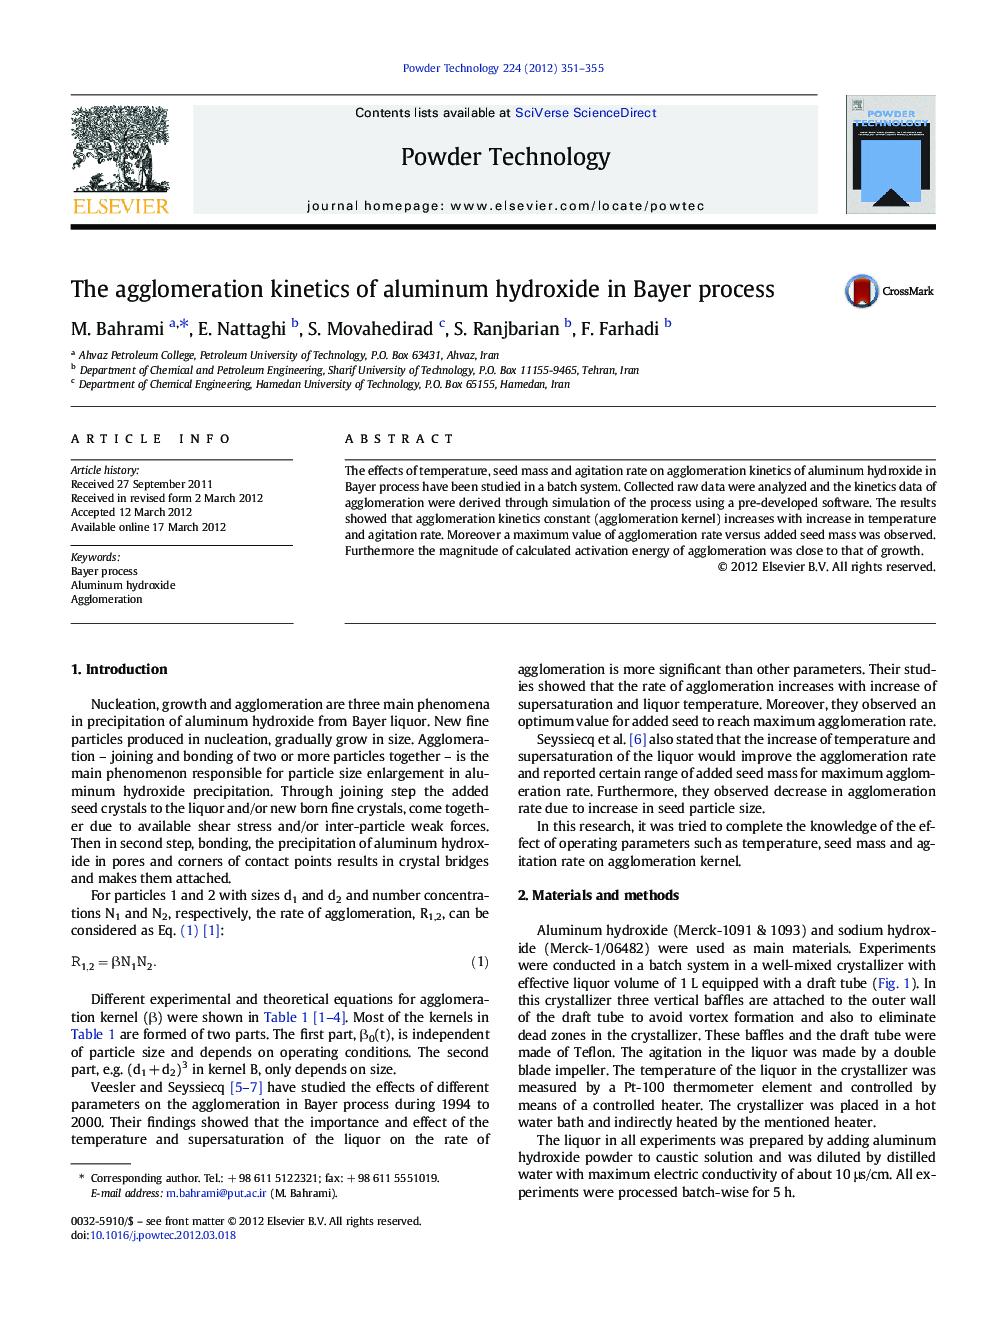 The agglomeration kinetics of aluminum hydroxide in Bayer process